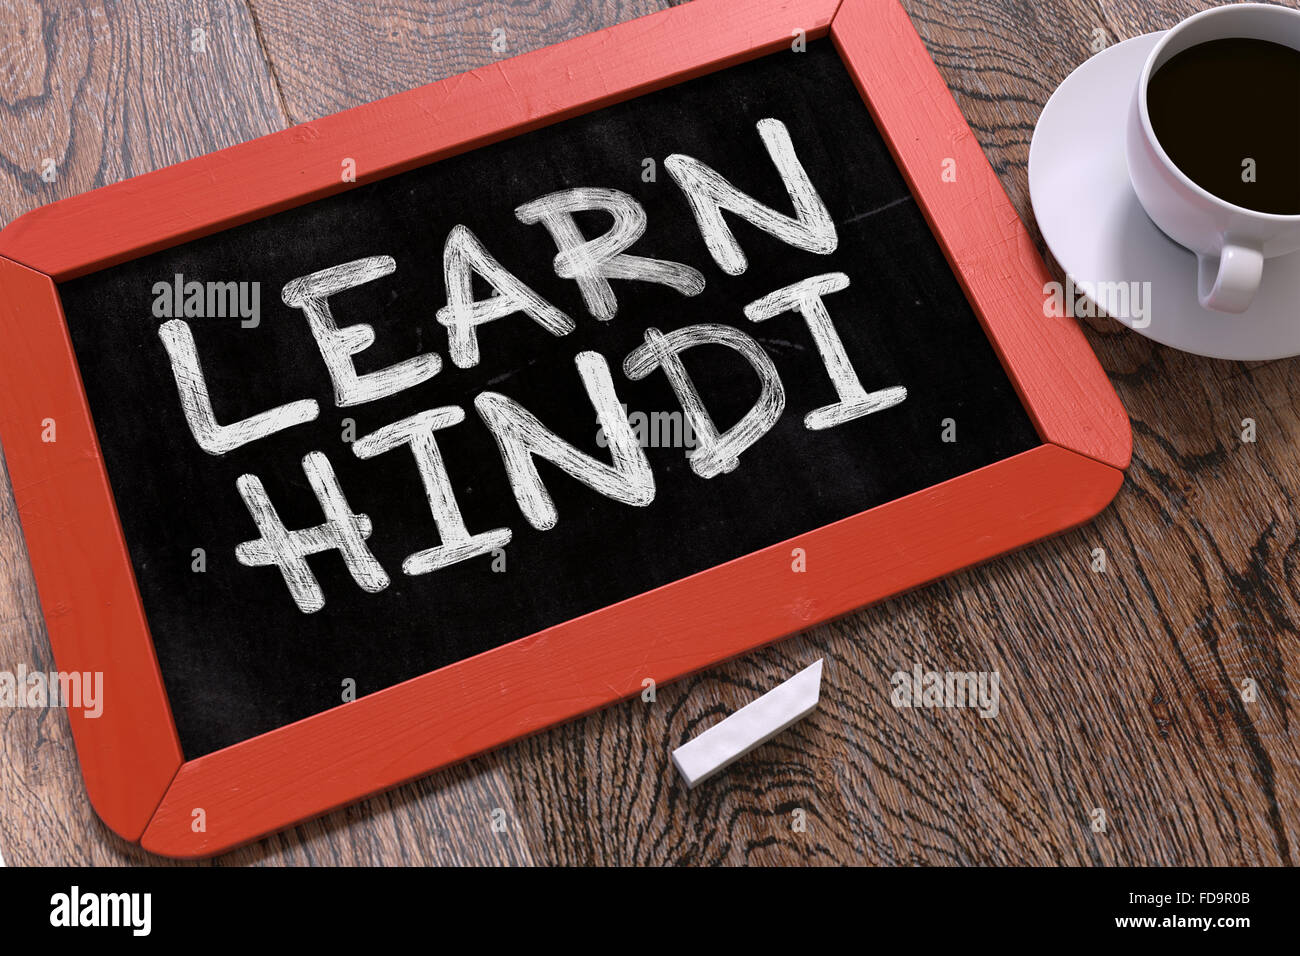 Learn Hindi Handwritten by White Chalk on a Blackboard. Composition with Small Red Chalkboard and Cup of Coffee. Top View. Stock Photo